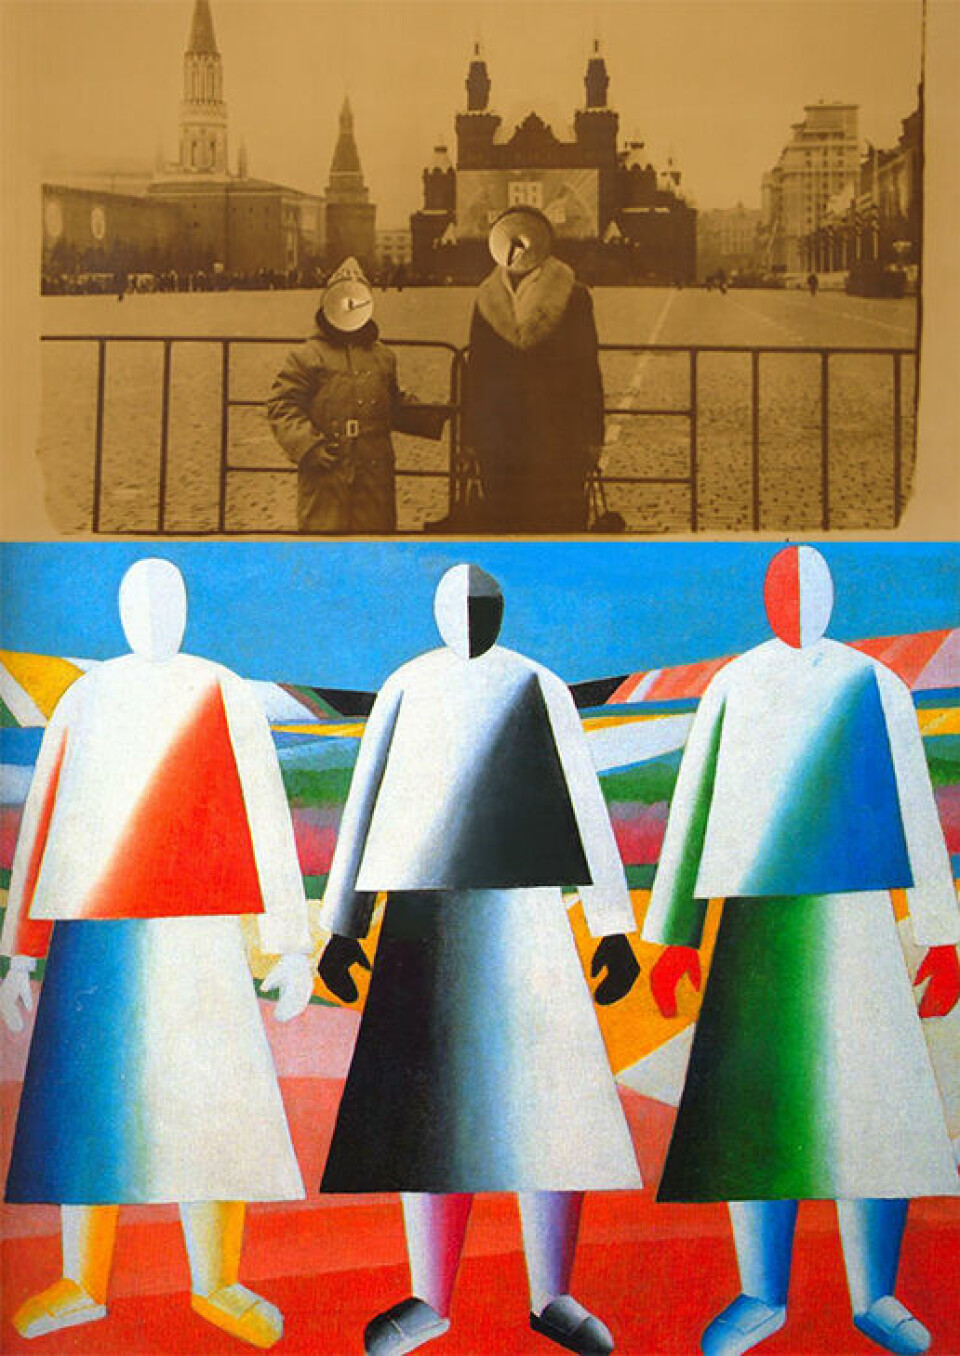 Two artworks alluding to Soviet collectivisation and de-individualisation: Kazimir Malevich’s sketch “Girls in the Fields” (1932), created during the artist’s Ukrainian period, and a photo from the series “Drawing Pin Album” by the Russian photographer Andrey Chegin (1980s-90s) which in turn echoes Malevich.